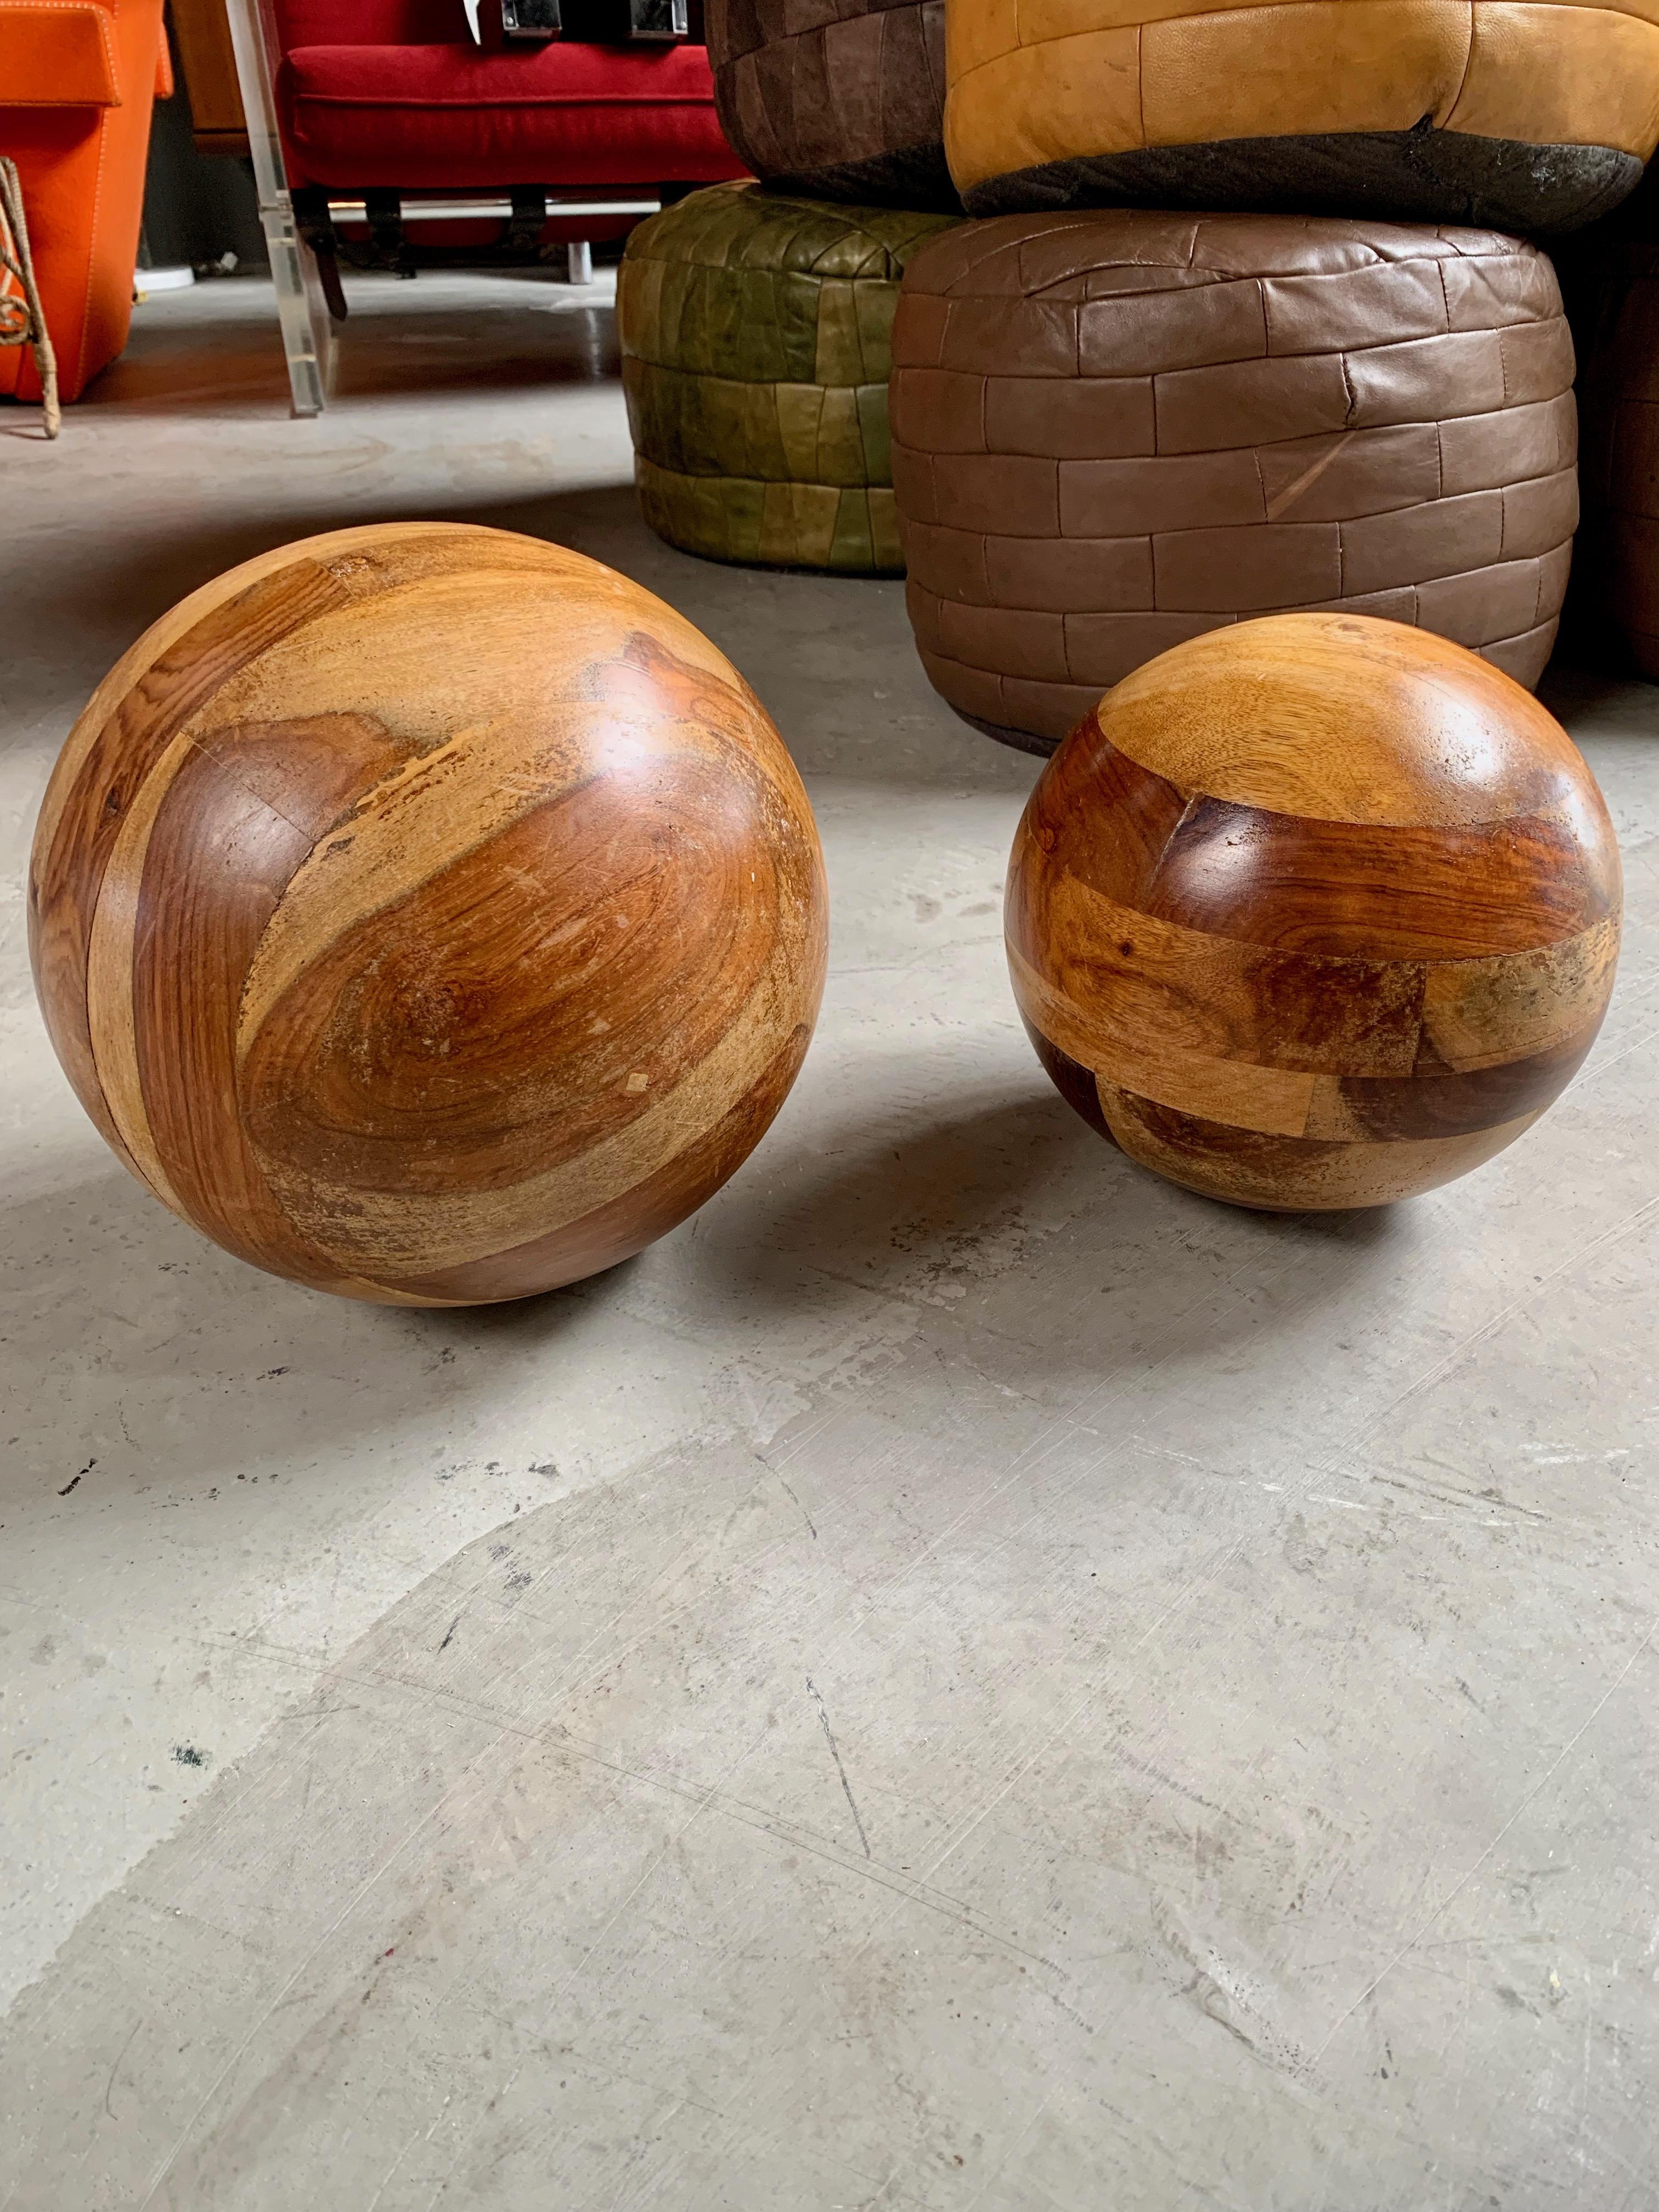 Great sculptural pair of wood balls. Made of strips of wood fused together. Large ball approximately 11